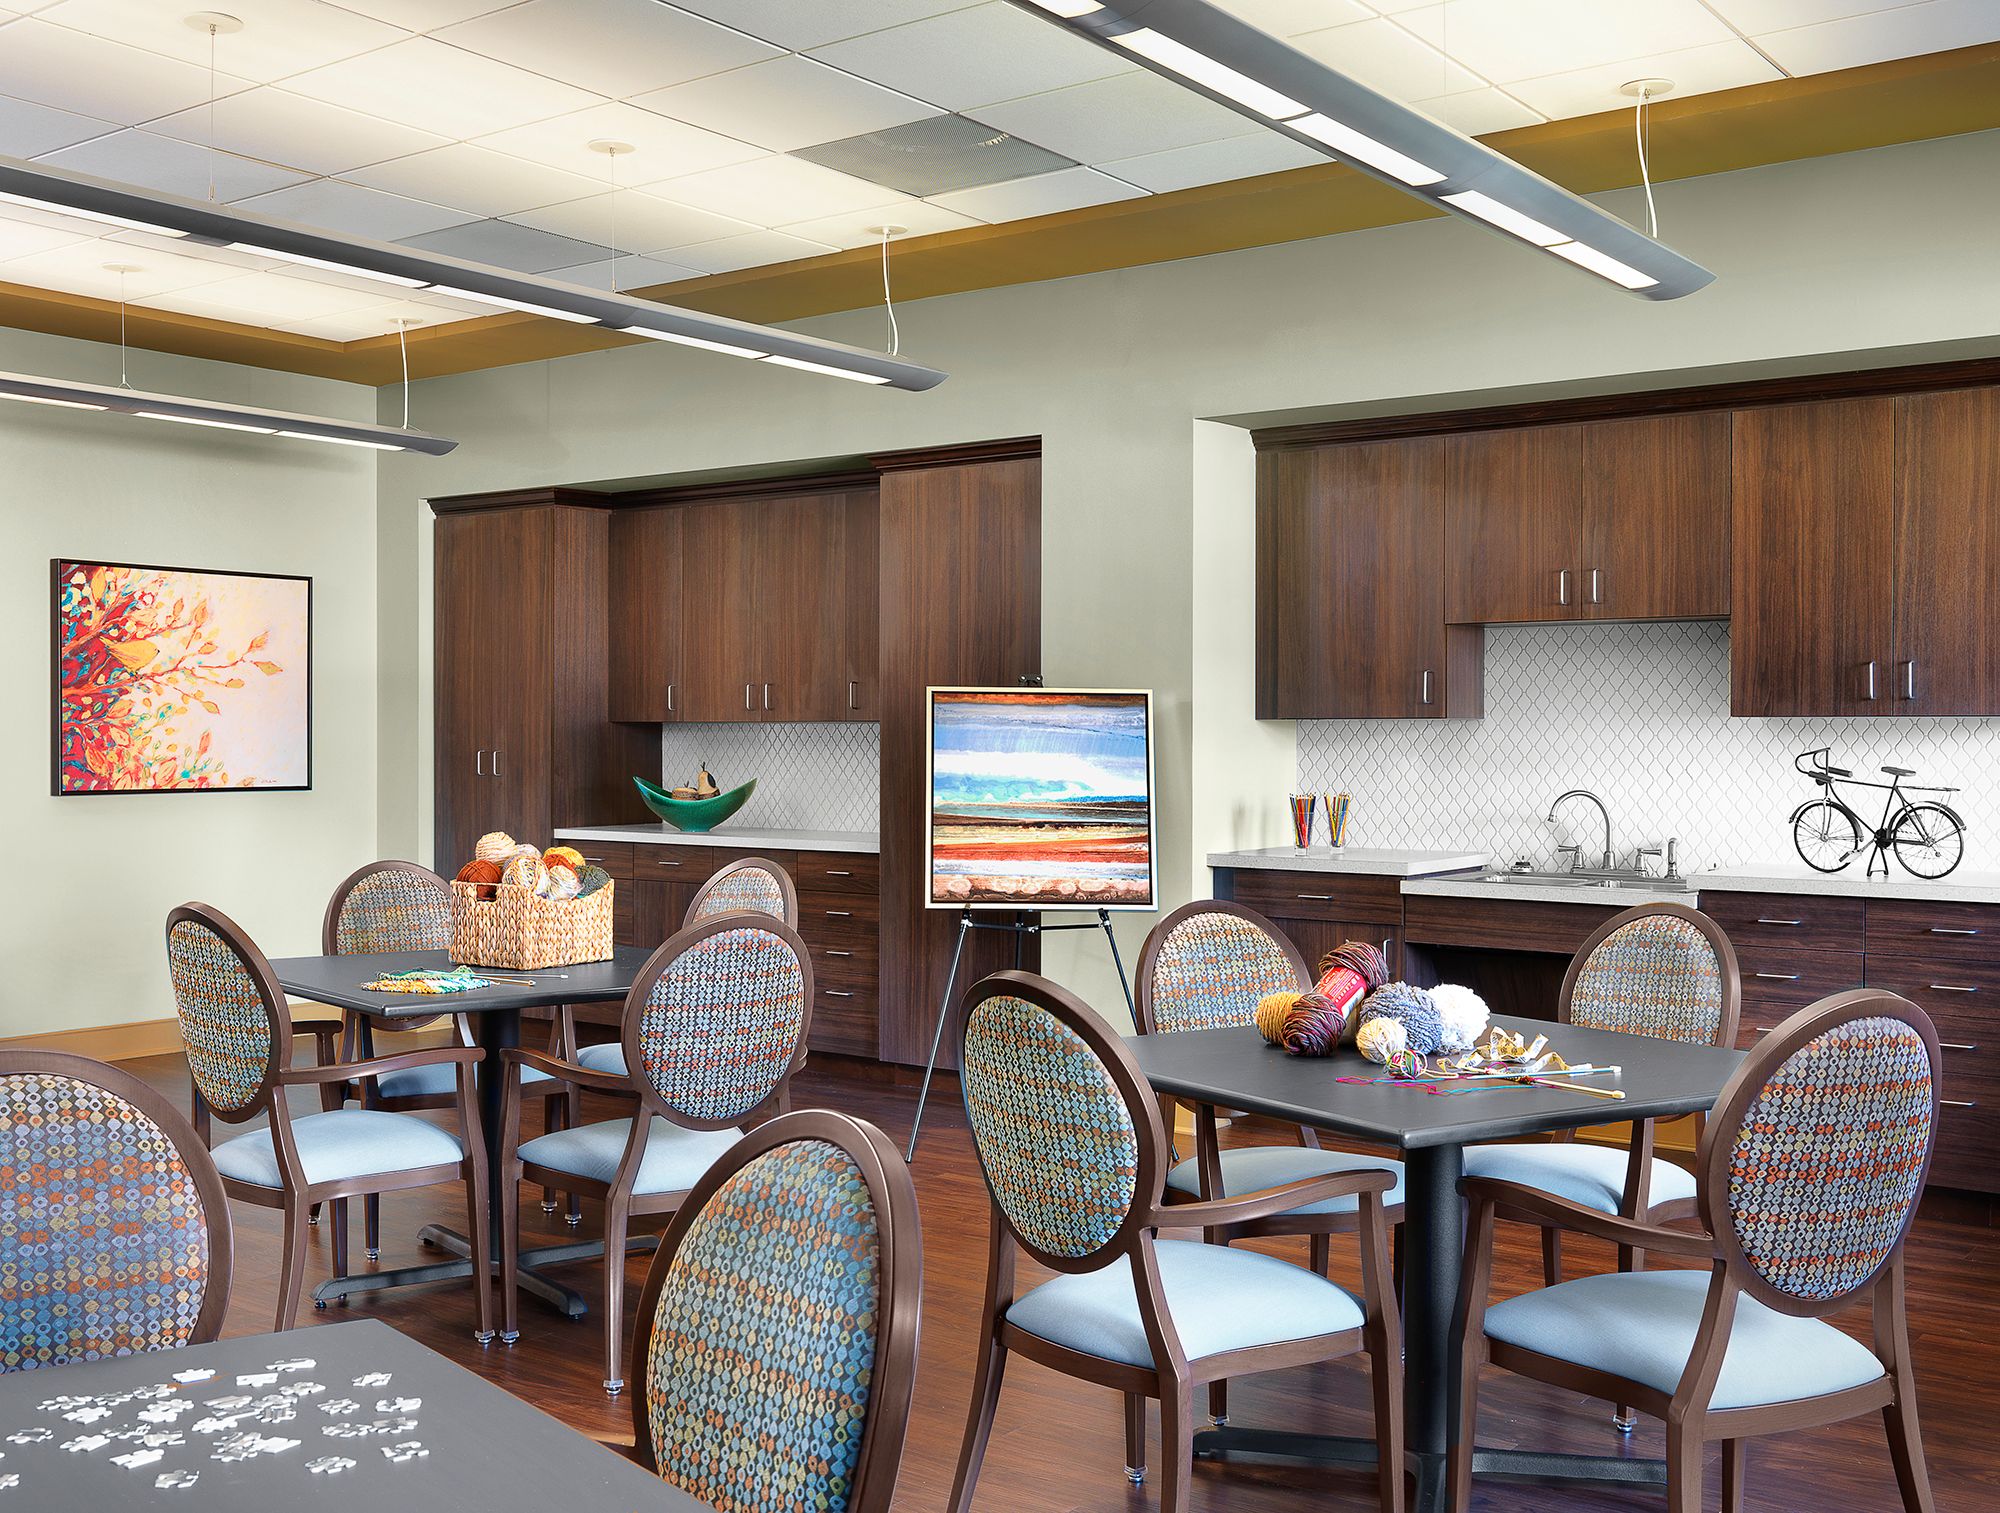 Interior view of Kingswood senior living community featuring dining area, kitchen, and art decor.